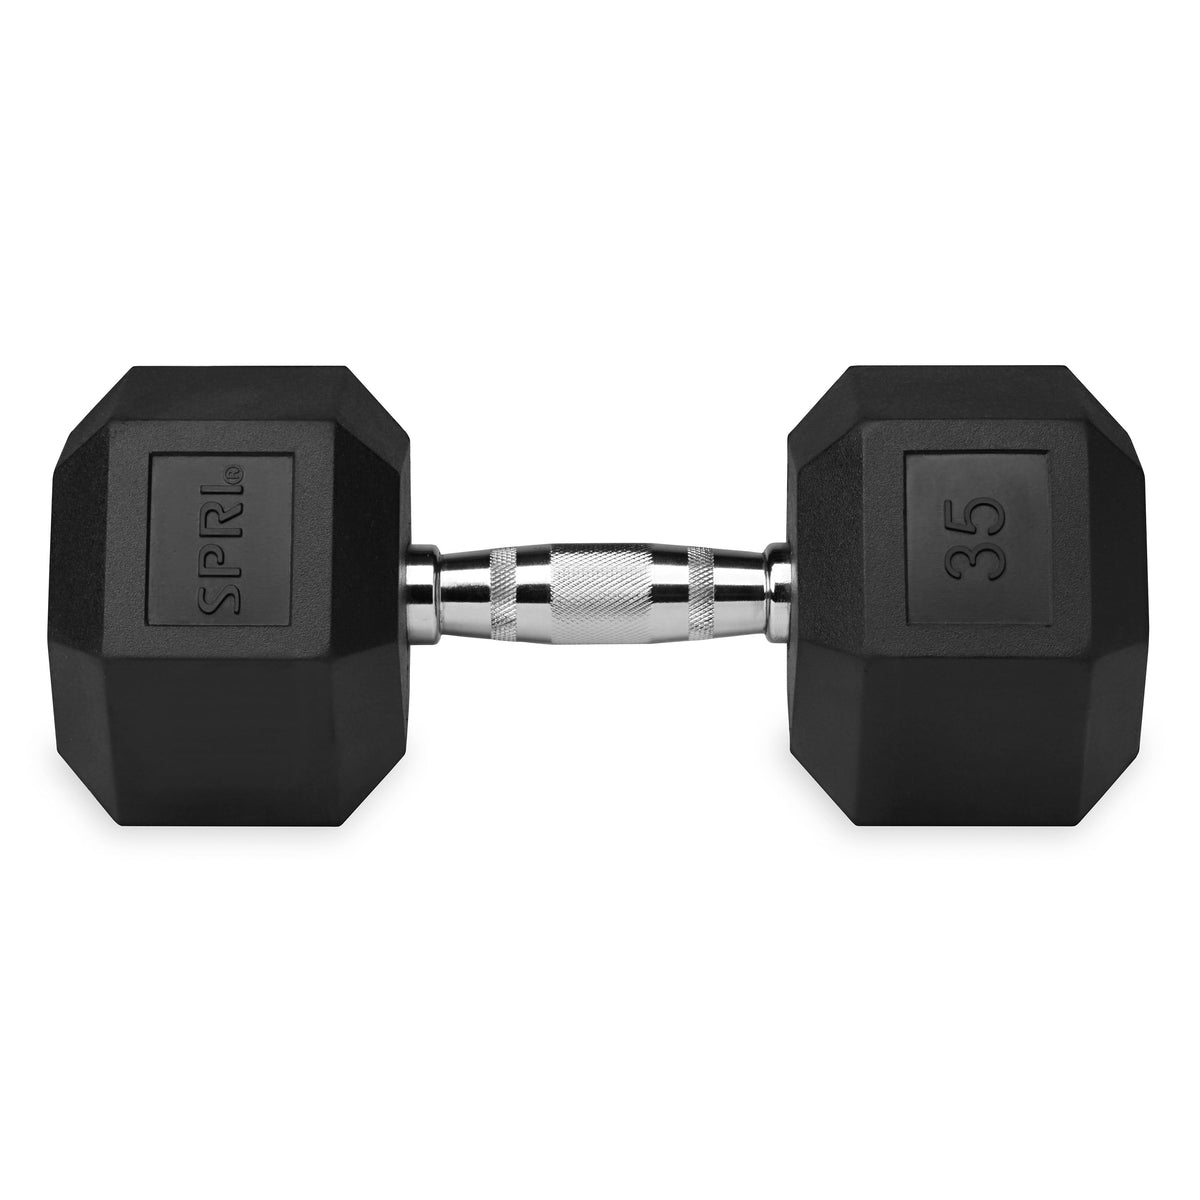 35lb six-sided single dumbbell side view